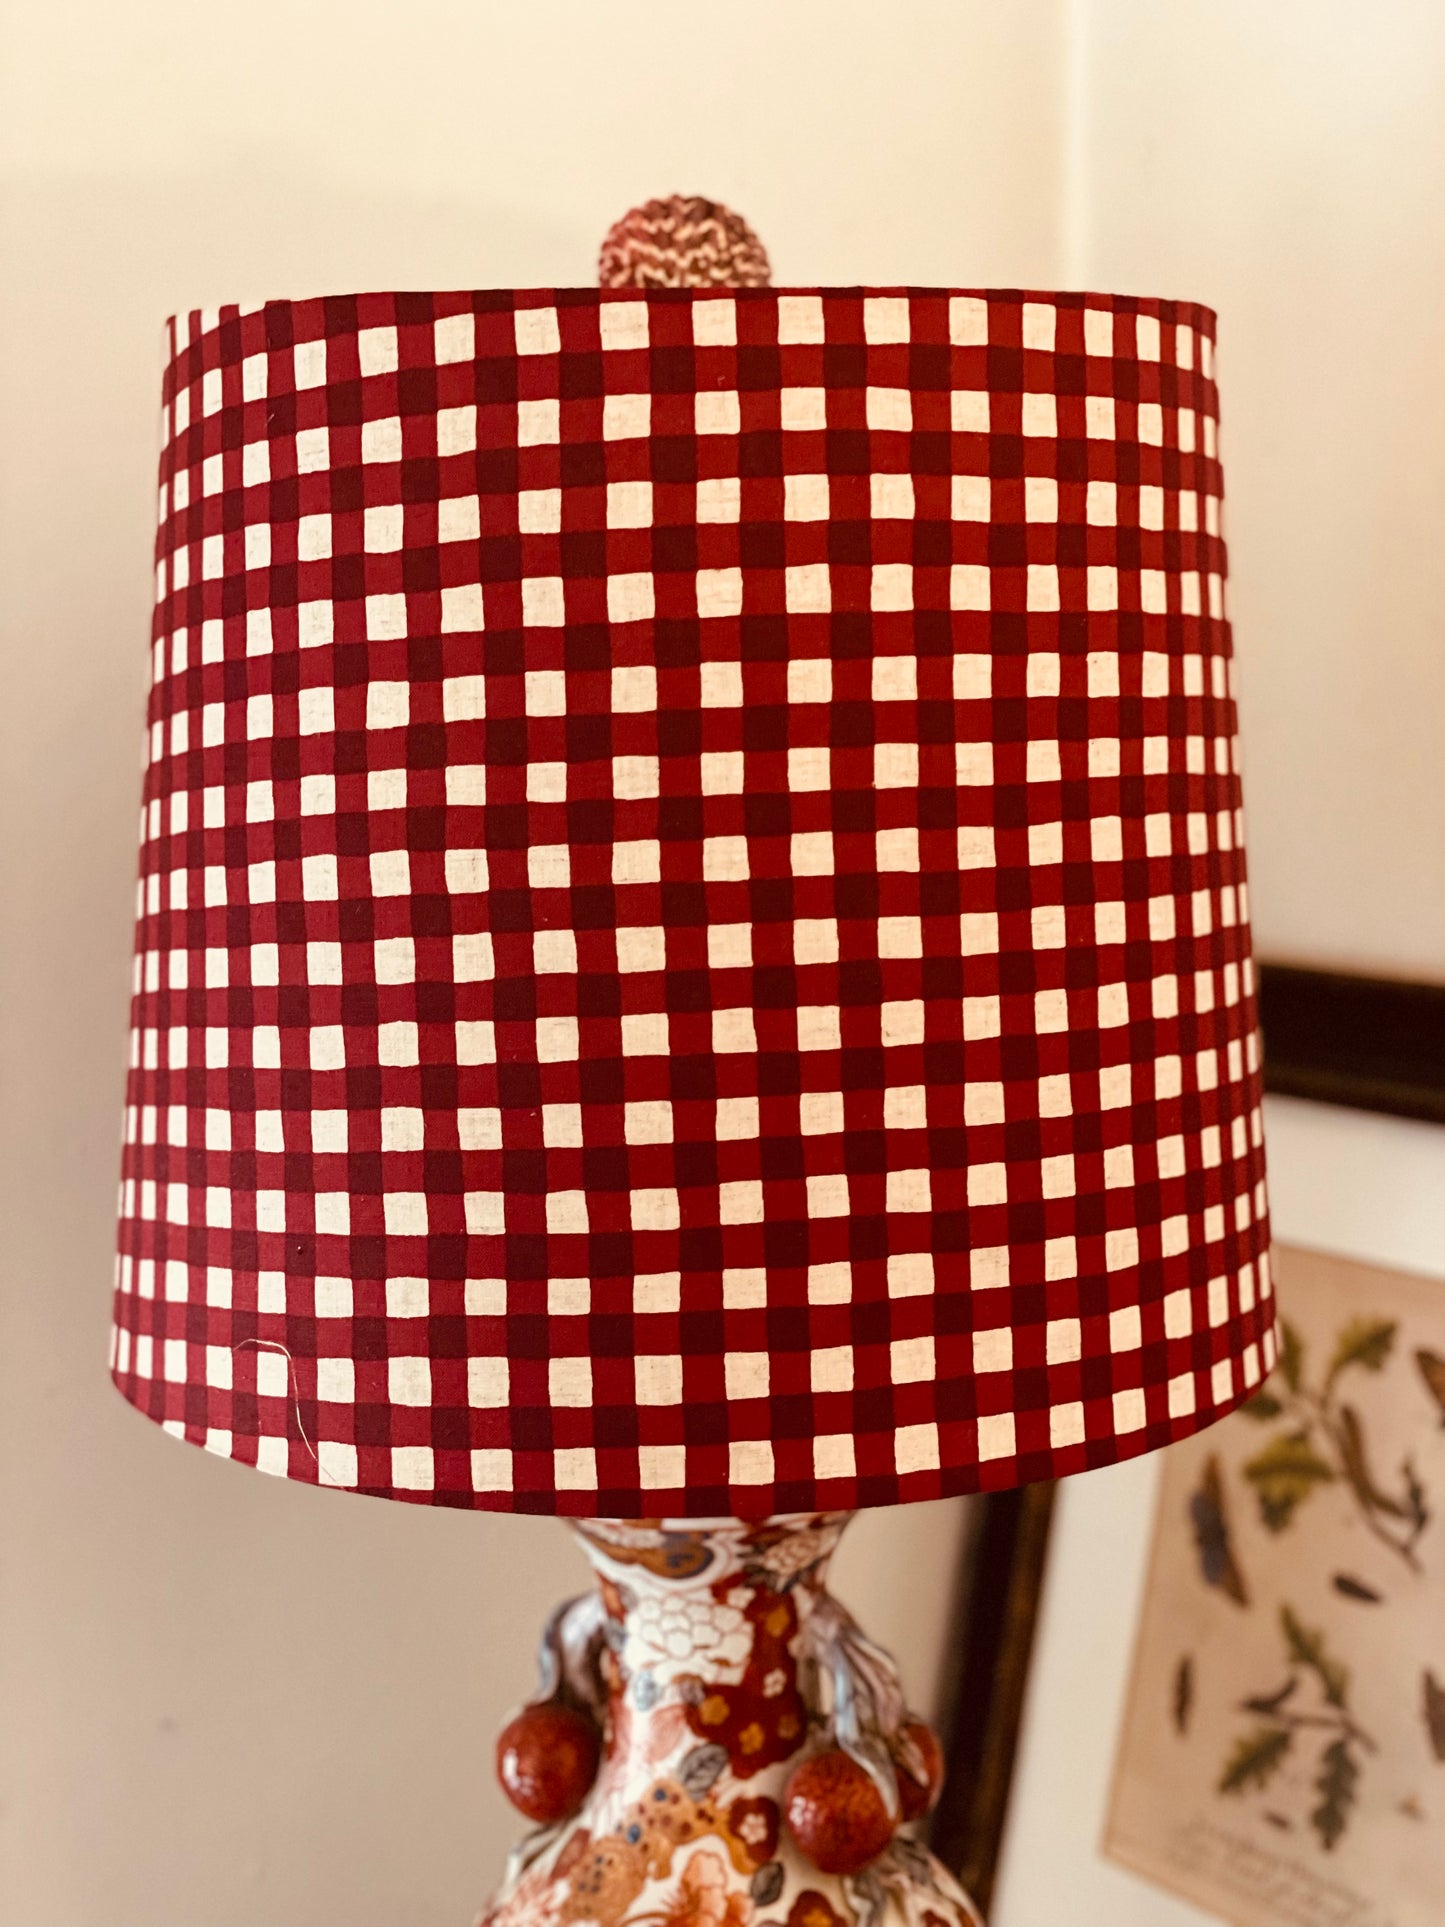 Large Empire Shade. 11.75 x 13.75 x 11.75. Maroon-Red Gingham Cotton-Linen from Japan.